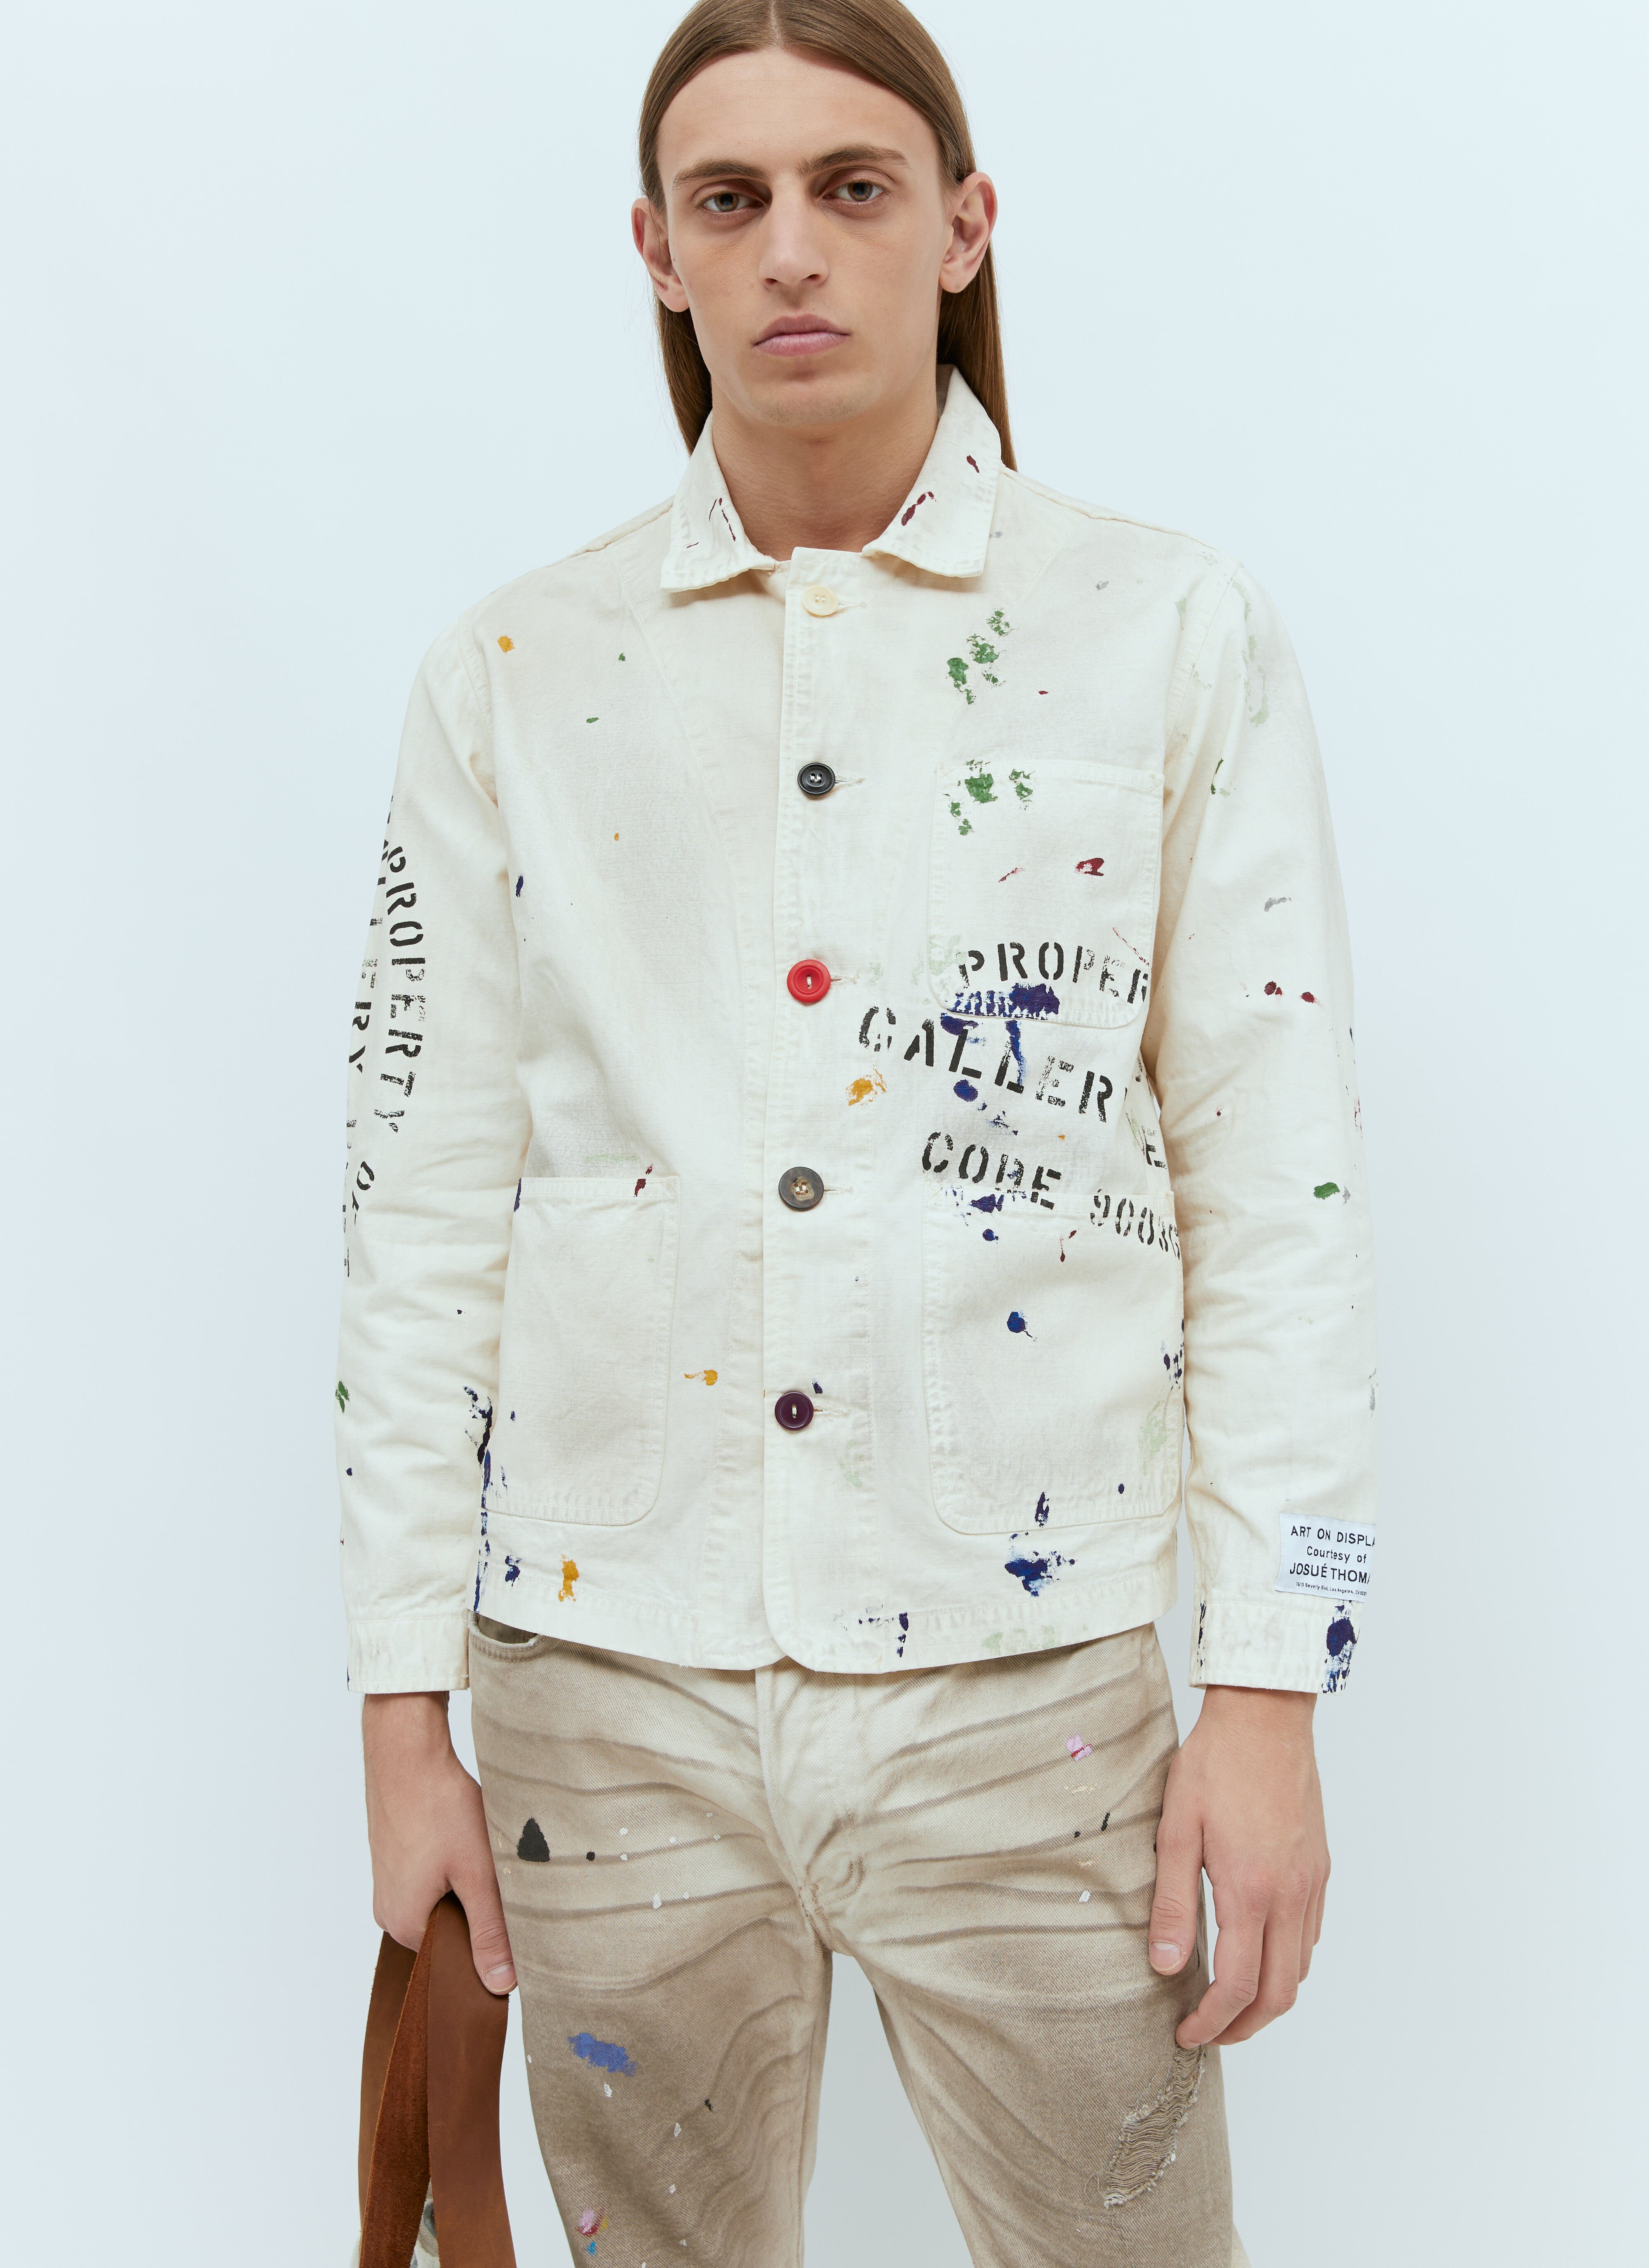 Gallery Dept. EP Jacket White gdp0153039